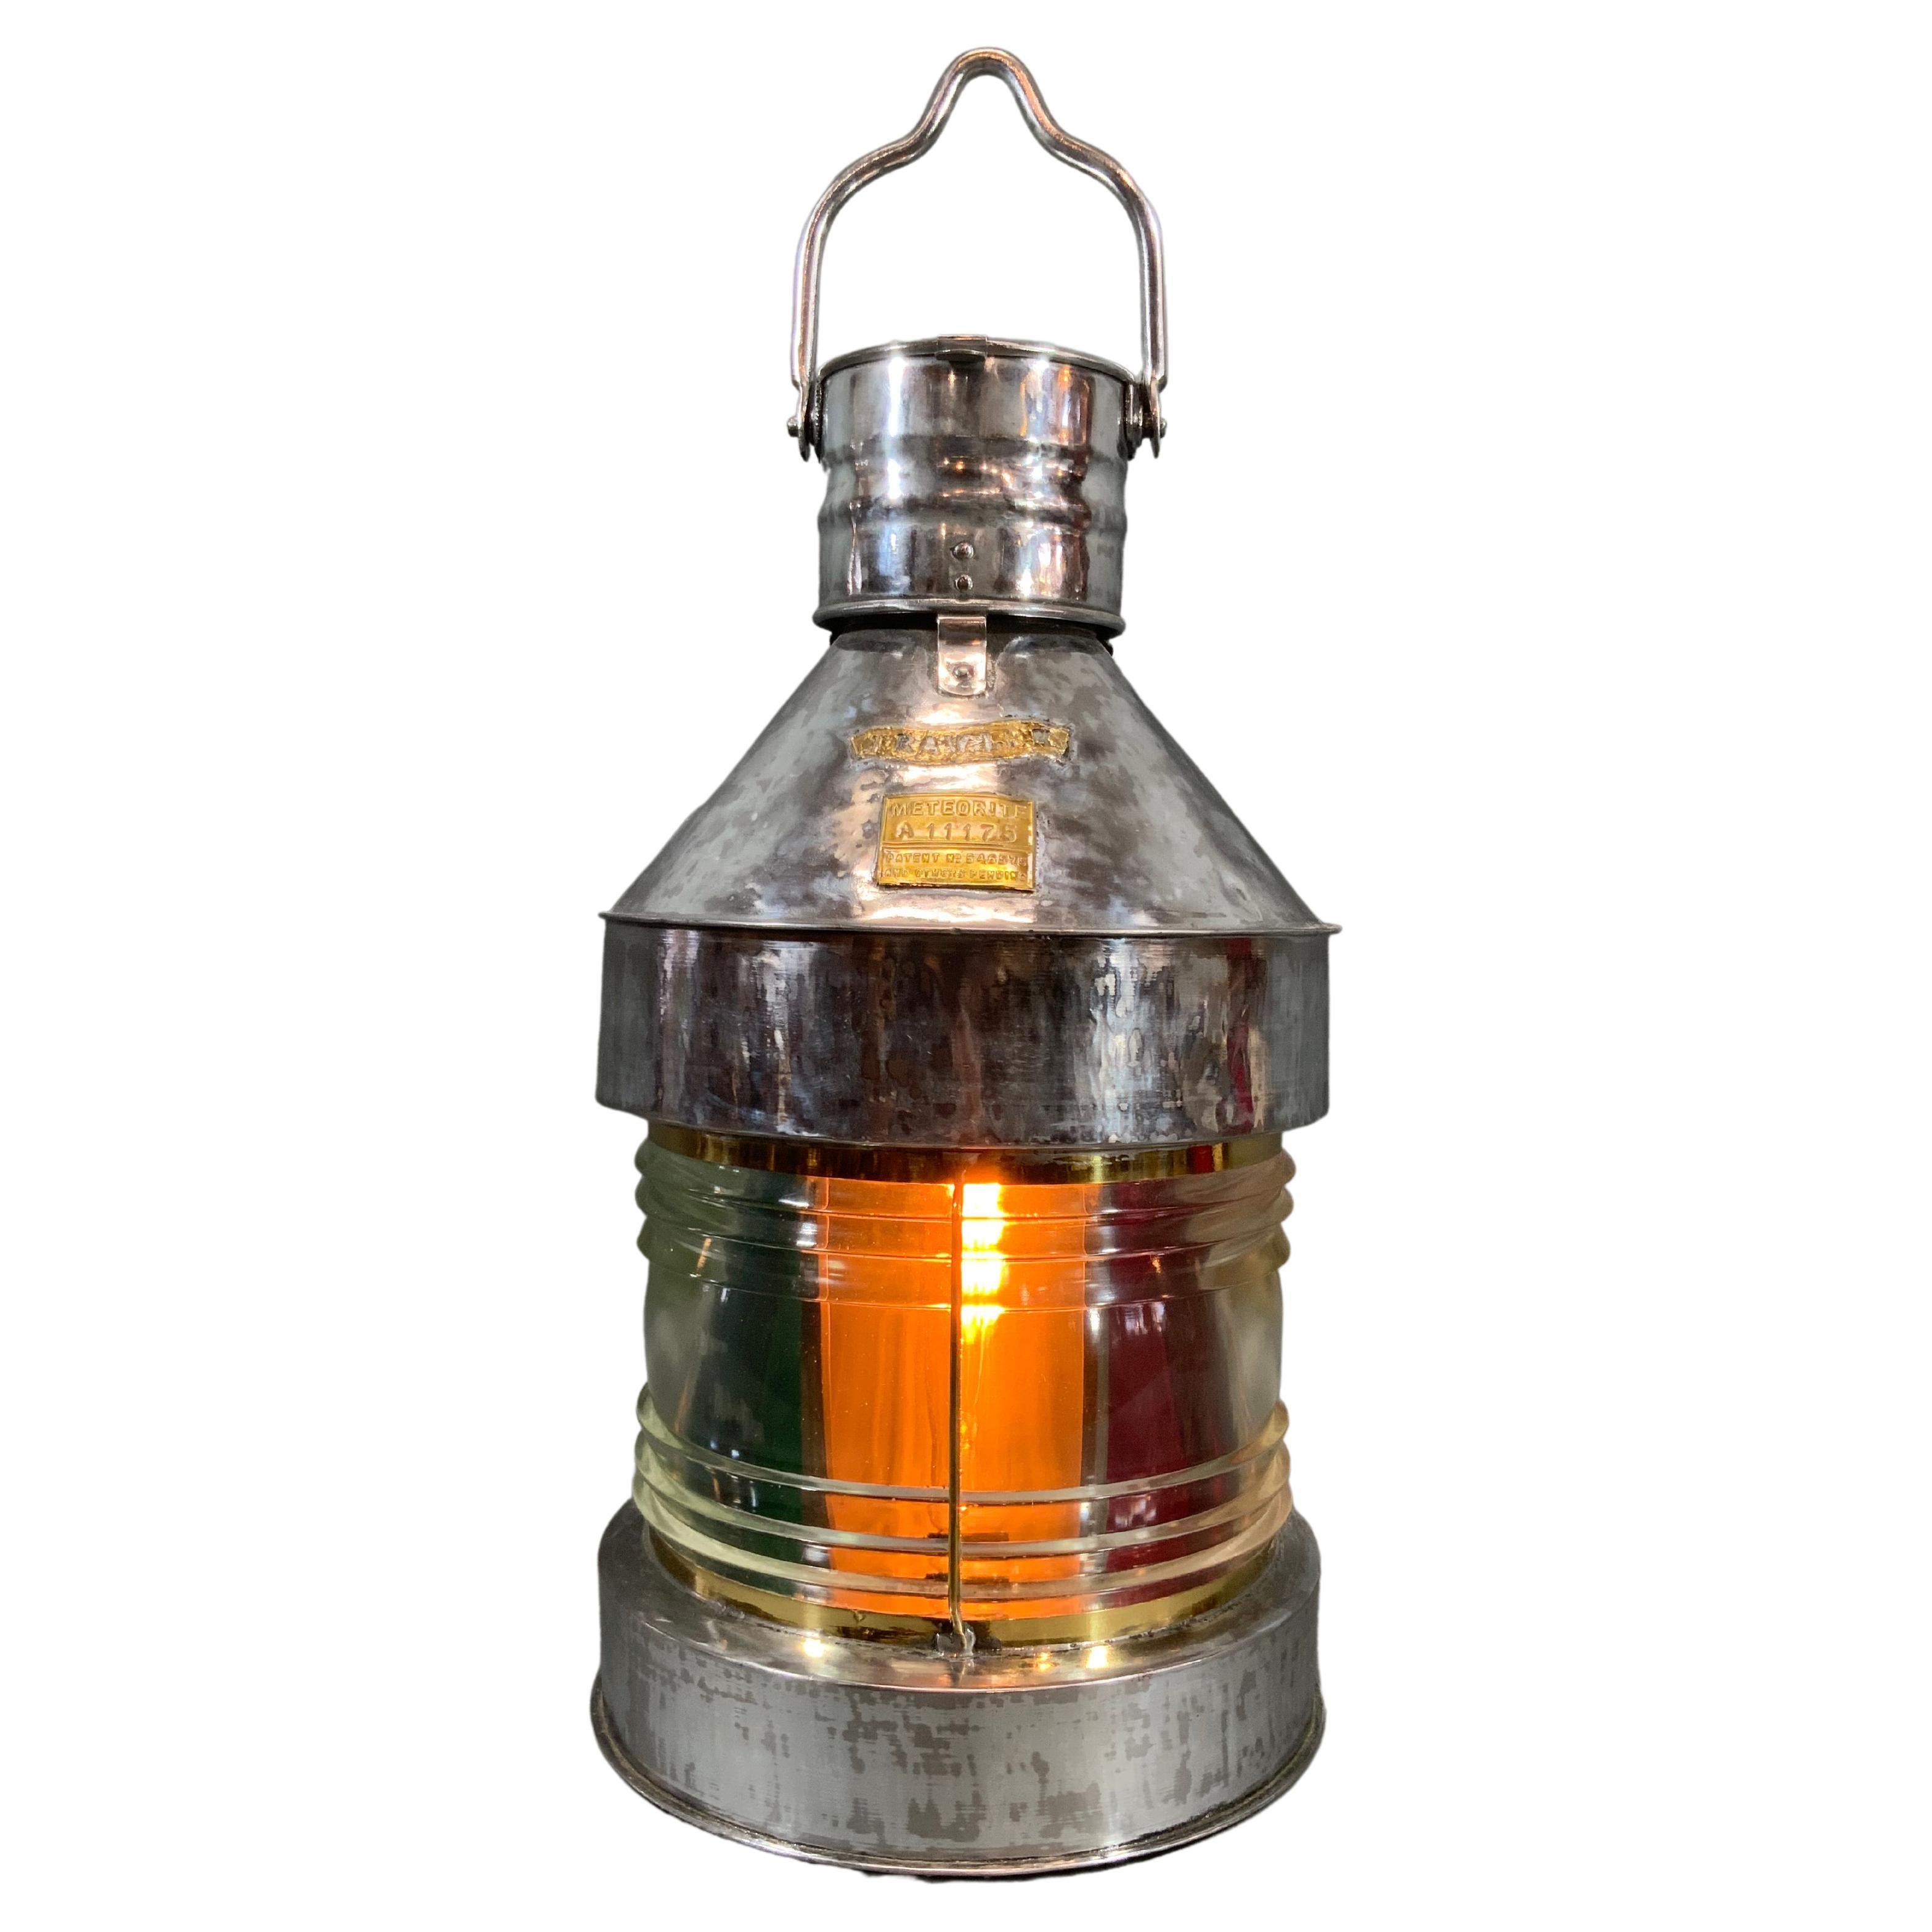 Ship's Trawling Lantern with Red and Blue Filters by Meteorite "A-11175" For Sale